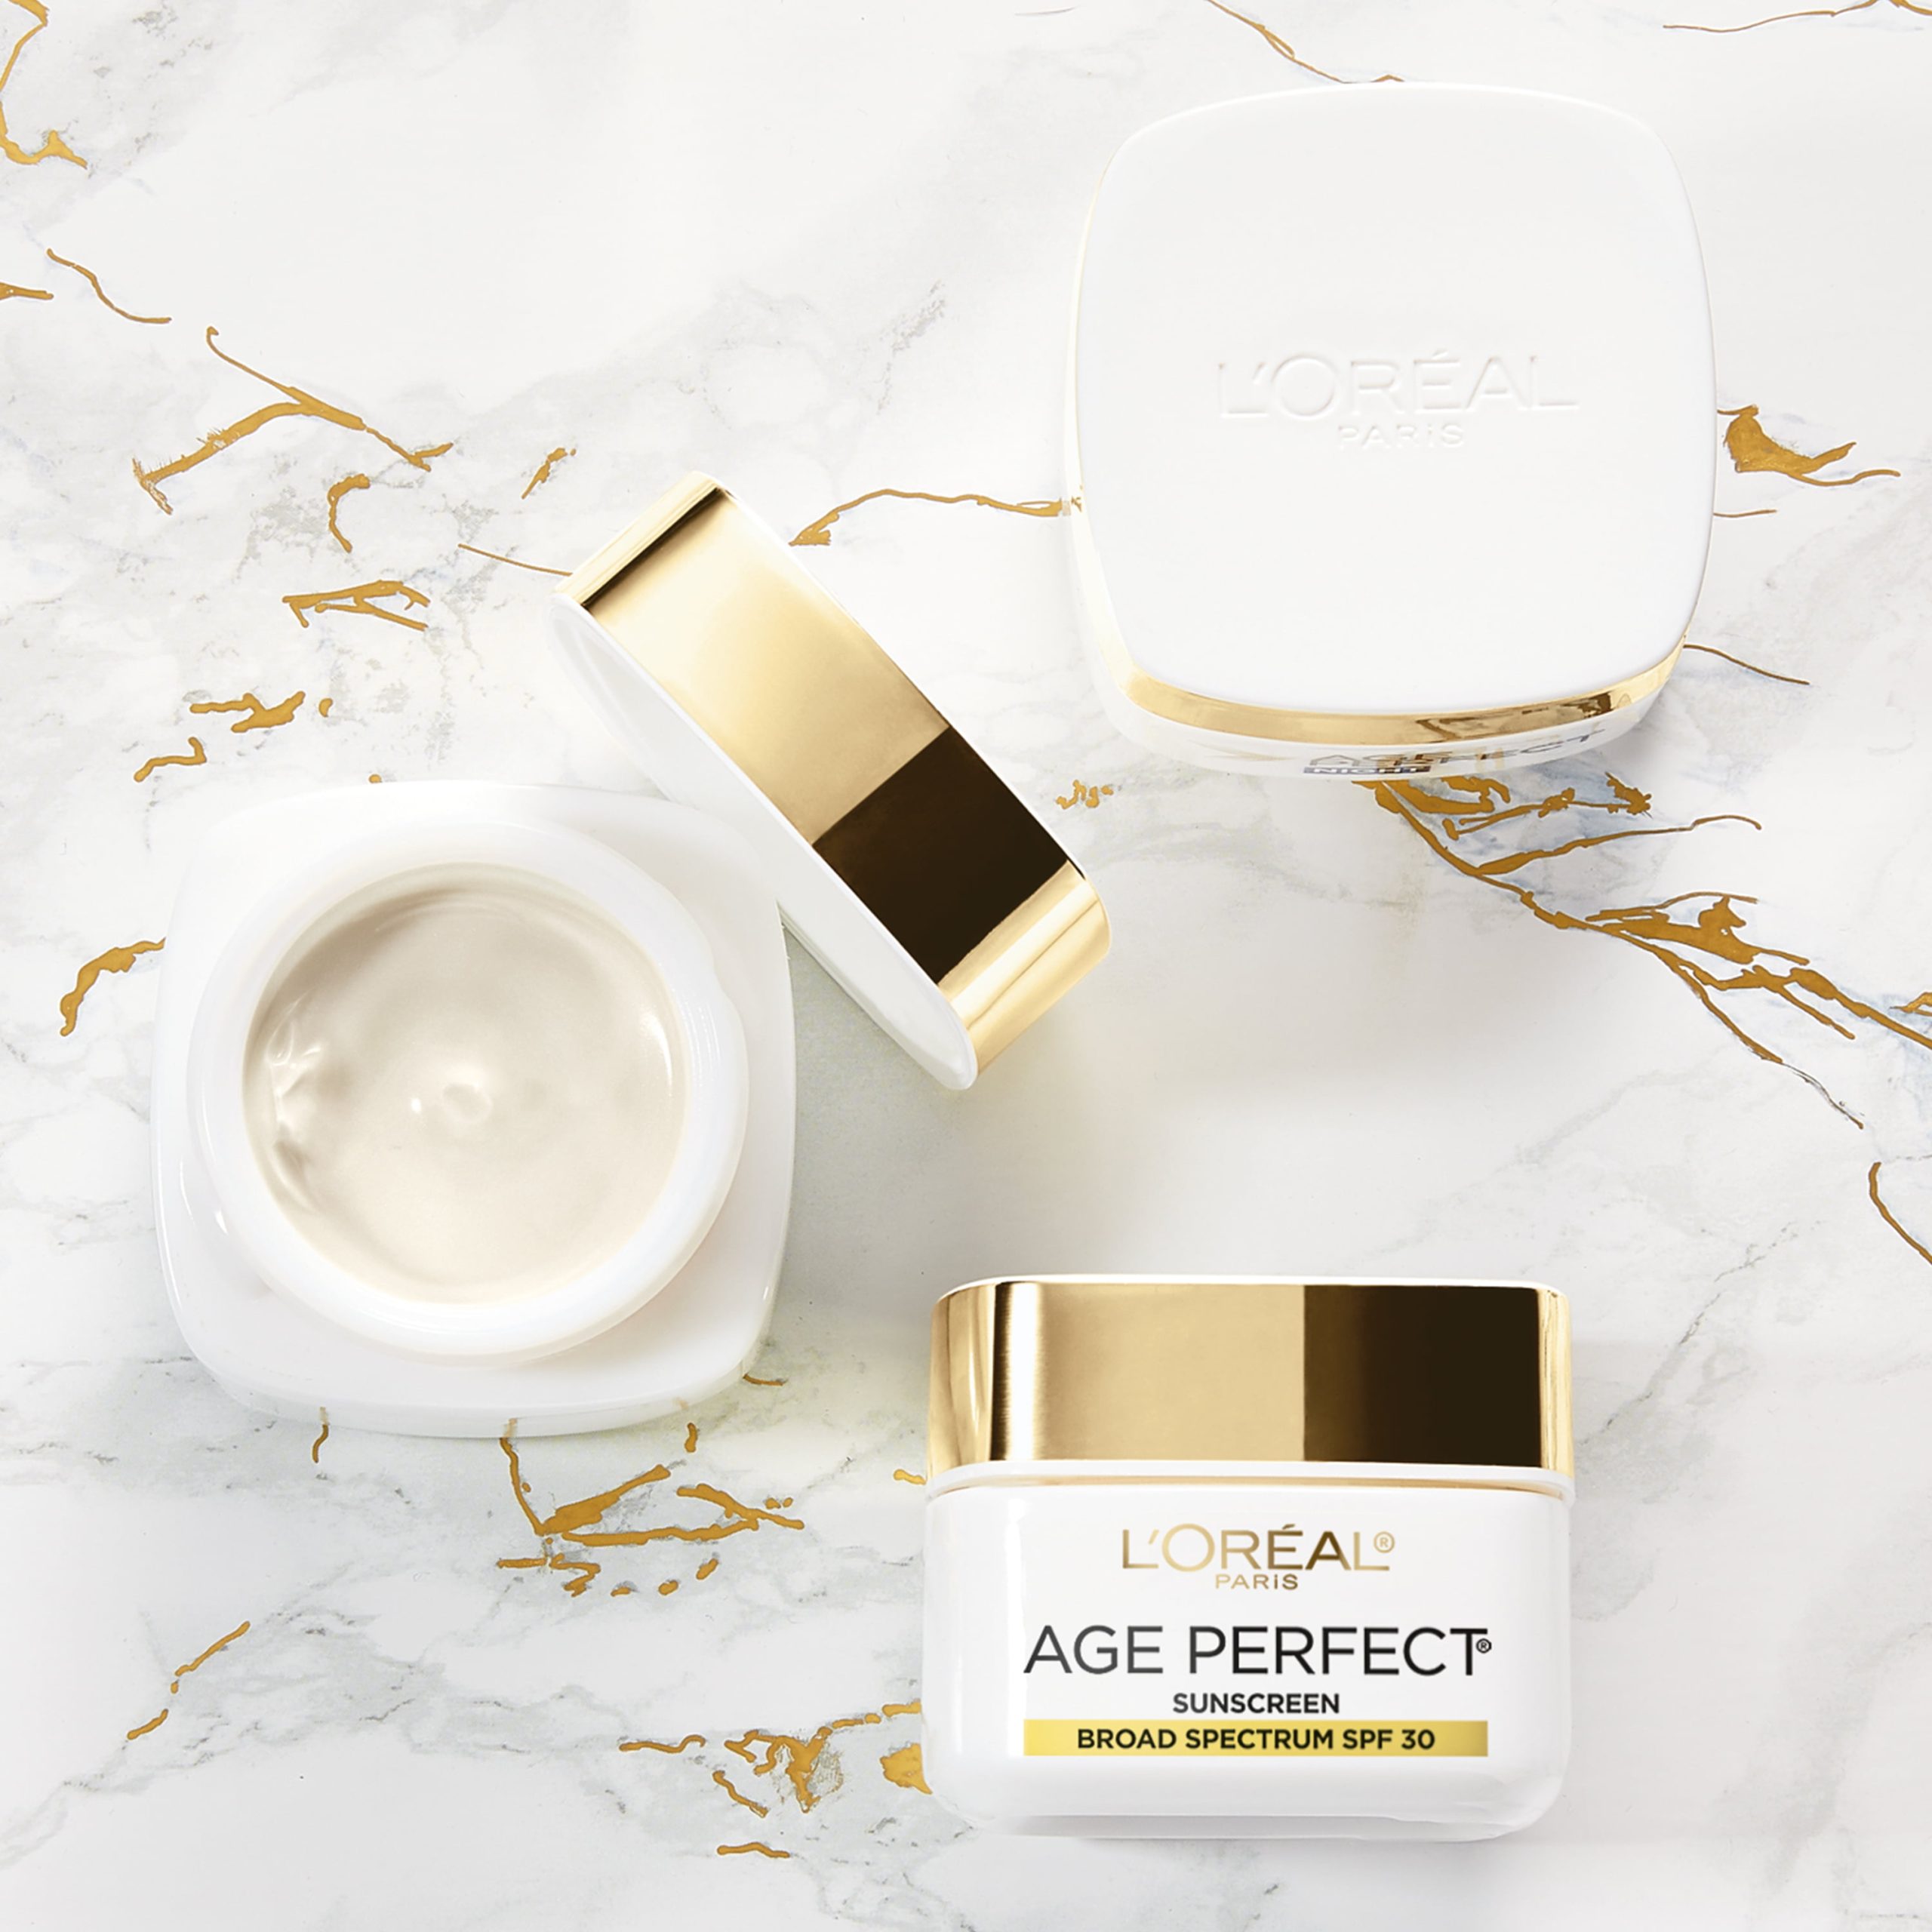 Age Perfect Colágeno Expert Spf30 by L'OREAL PARIS